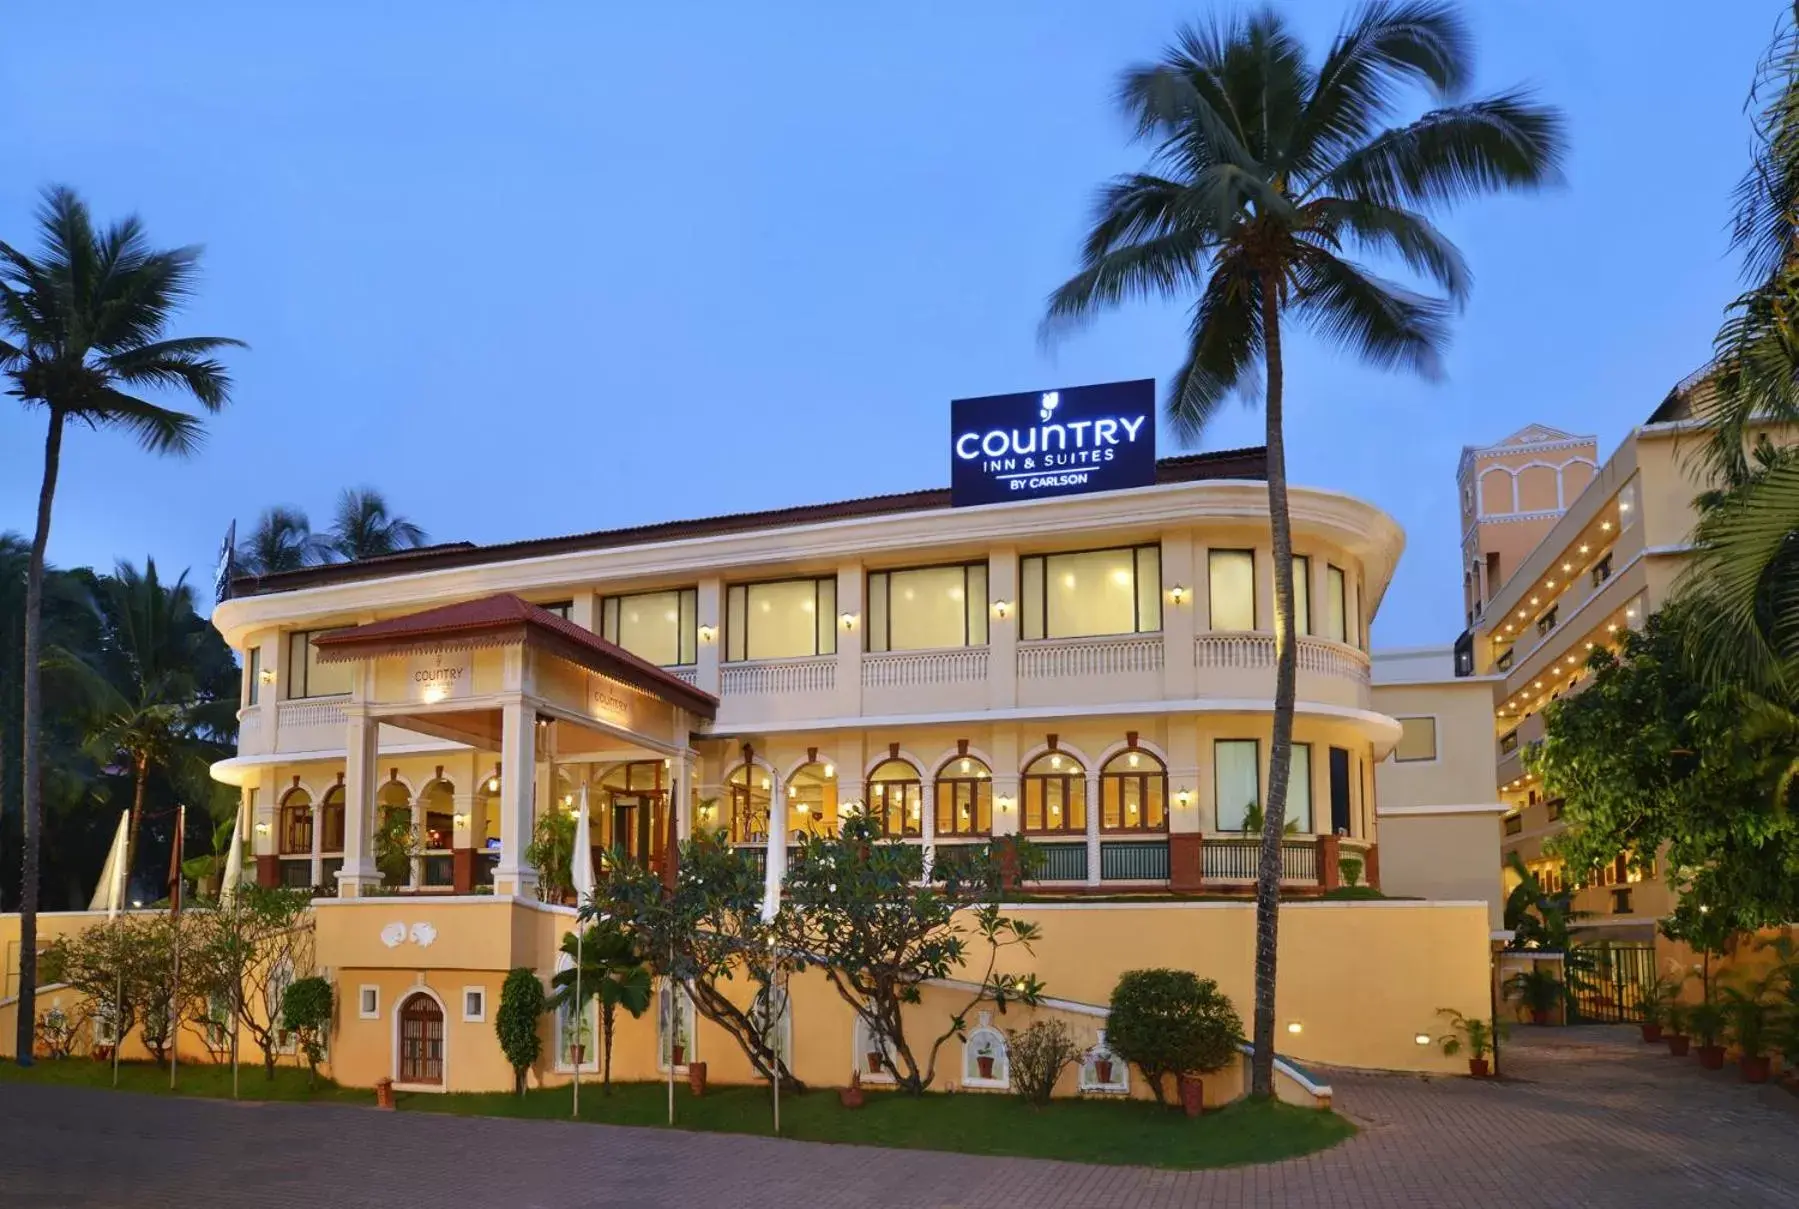 Facade/entrance, Property Building in Country Inn & Suites by Radisson, Goa Candolim